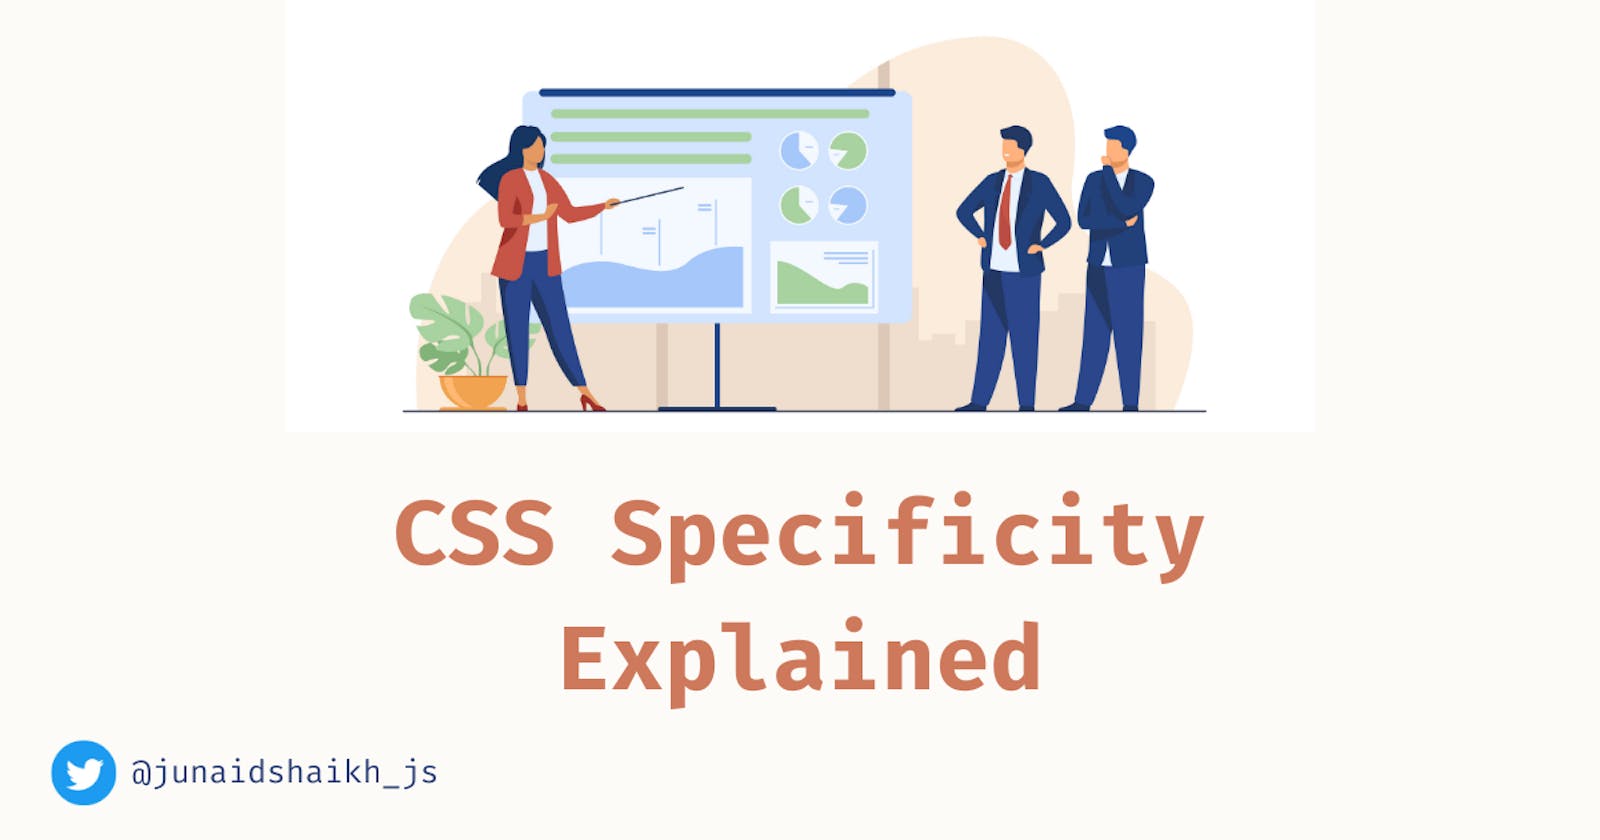 CSS Specificity Explained